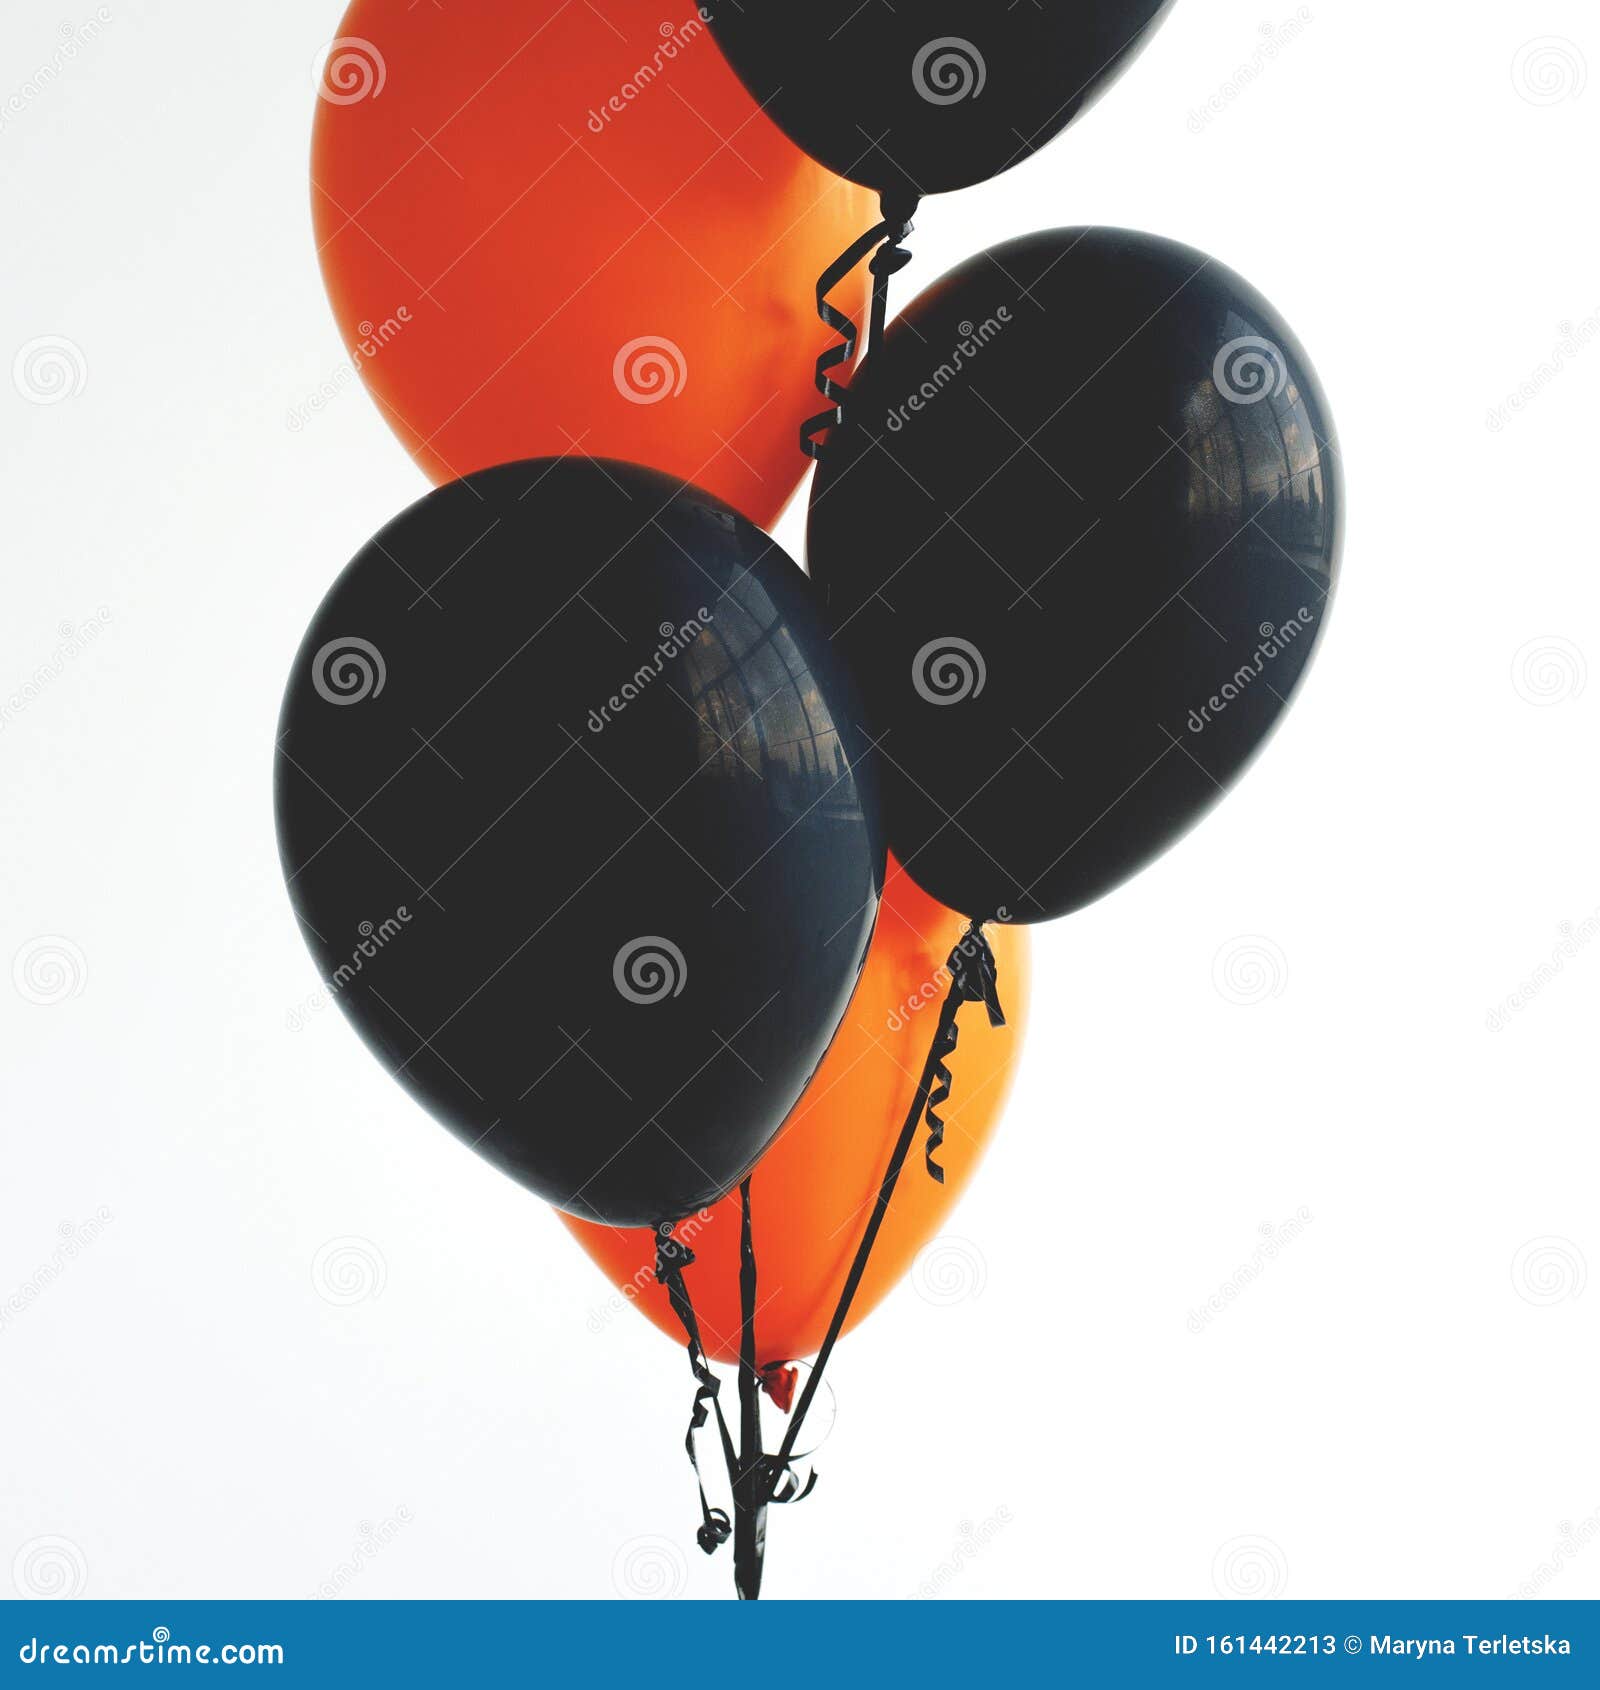 Latex balloons orange and black for HALLOWEEN helium or self 5 inch Balloons